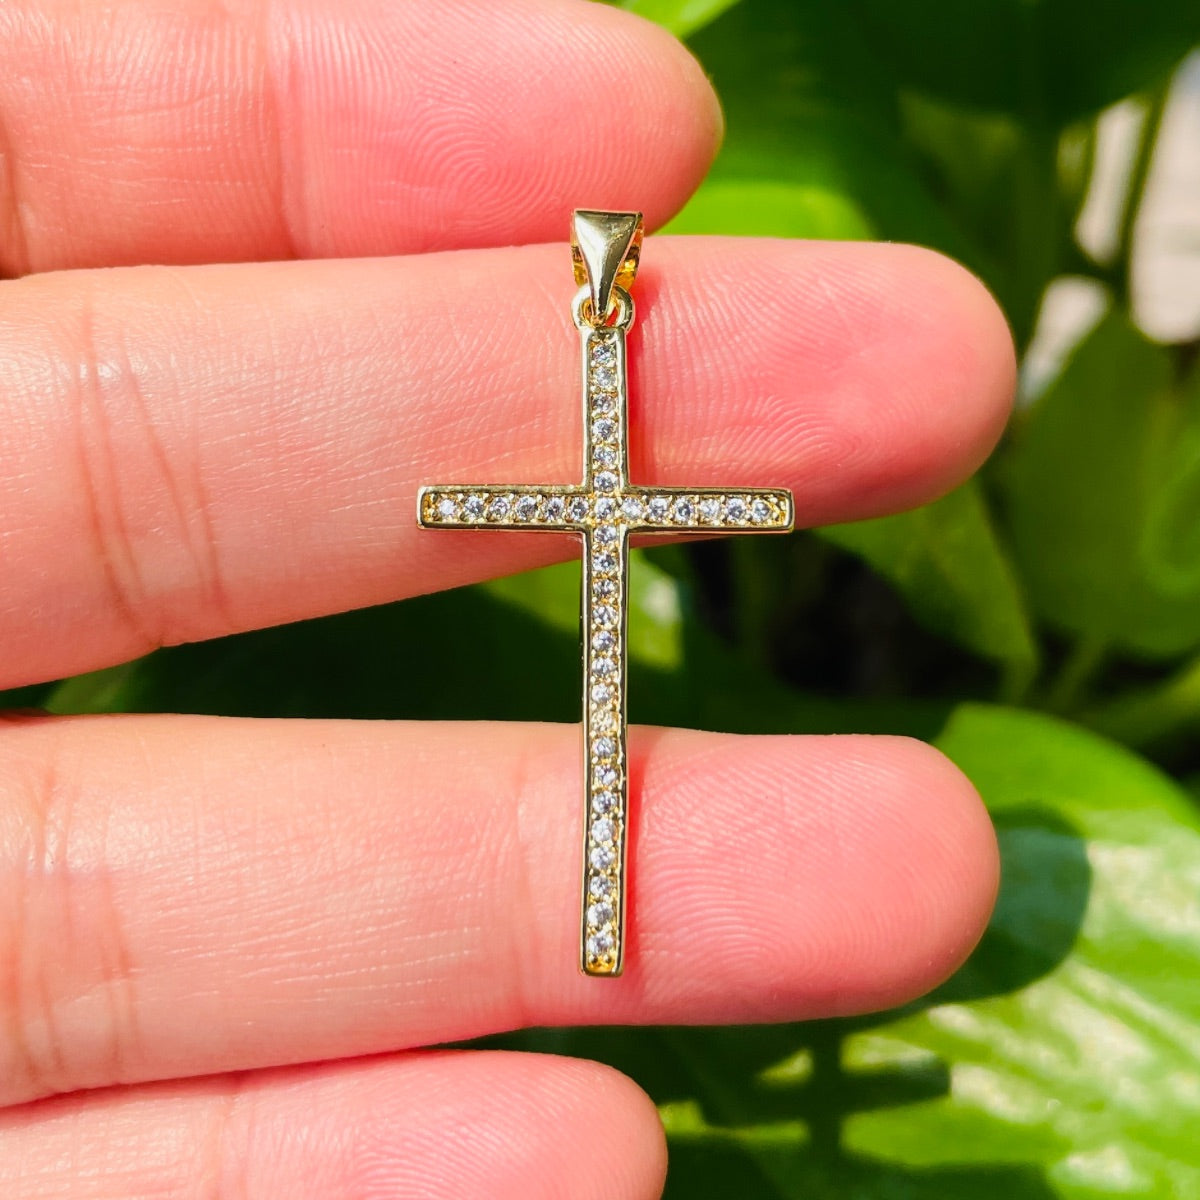 10pcs/lot Gold Silver Plated CZ Paved Cross Charms Gold CZ Paved Charms Crosses New Charms Arrivals Charms Beads Beyond